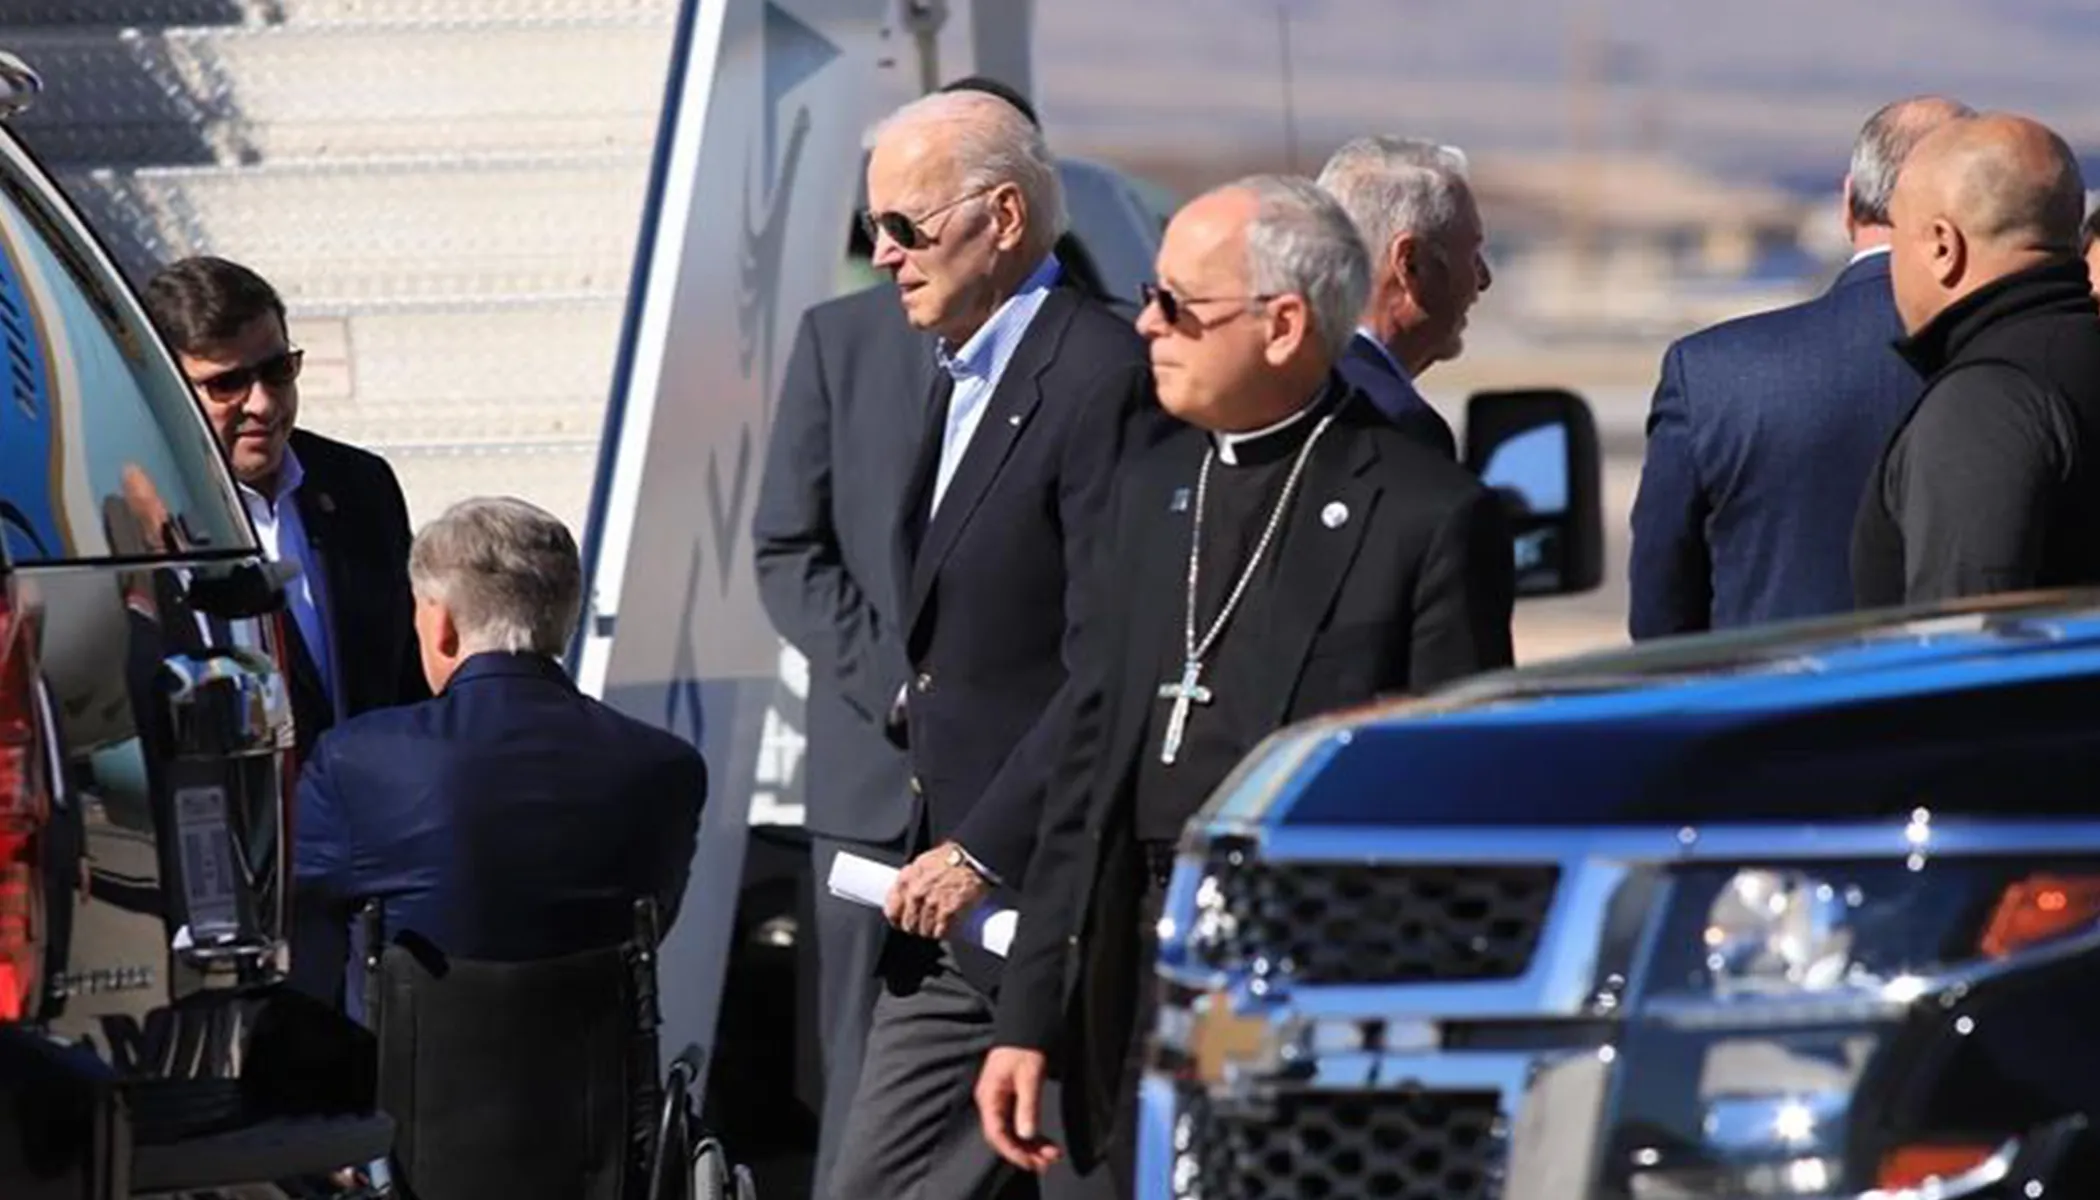 Bishop Seitz welcomes President Biden at the El Paso airport as he begins his first trip to the border as president Jan. 8, 2023.?w=200&h=150